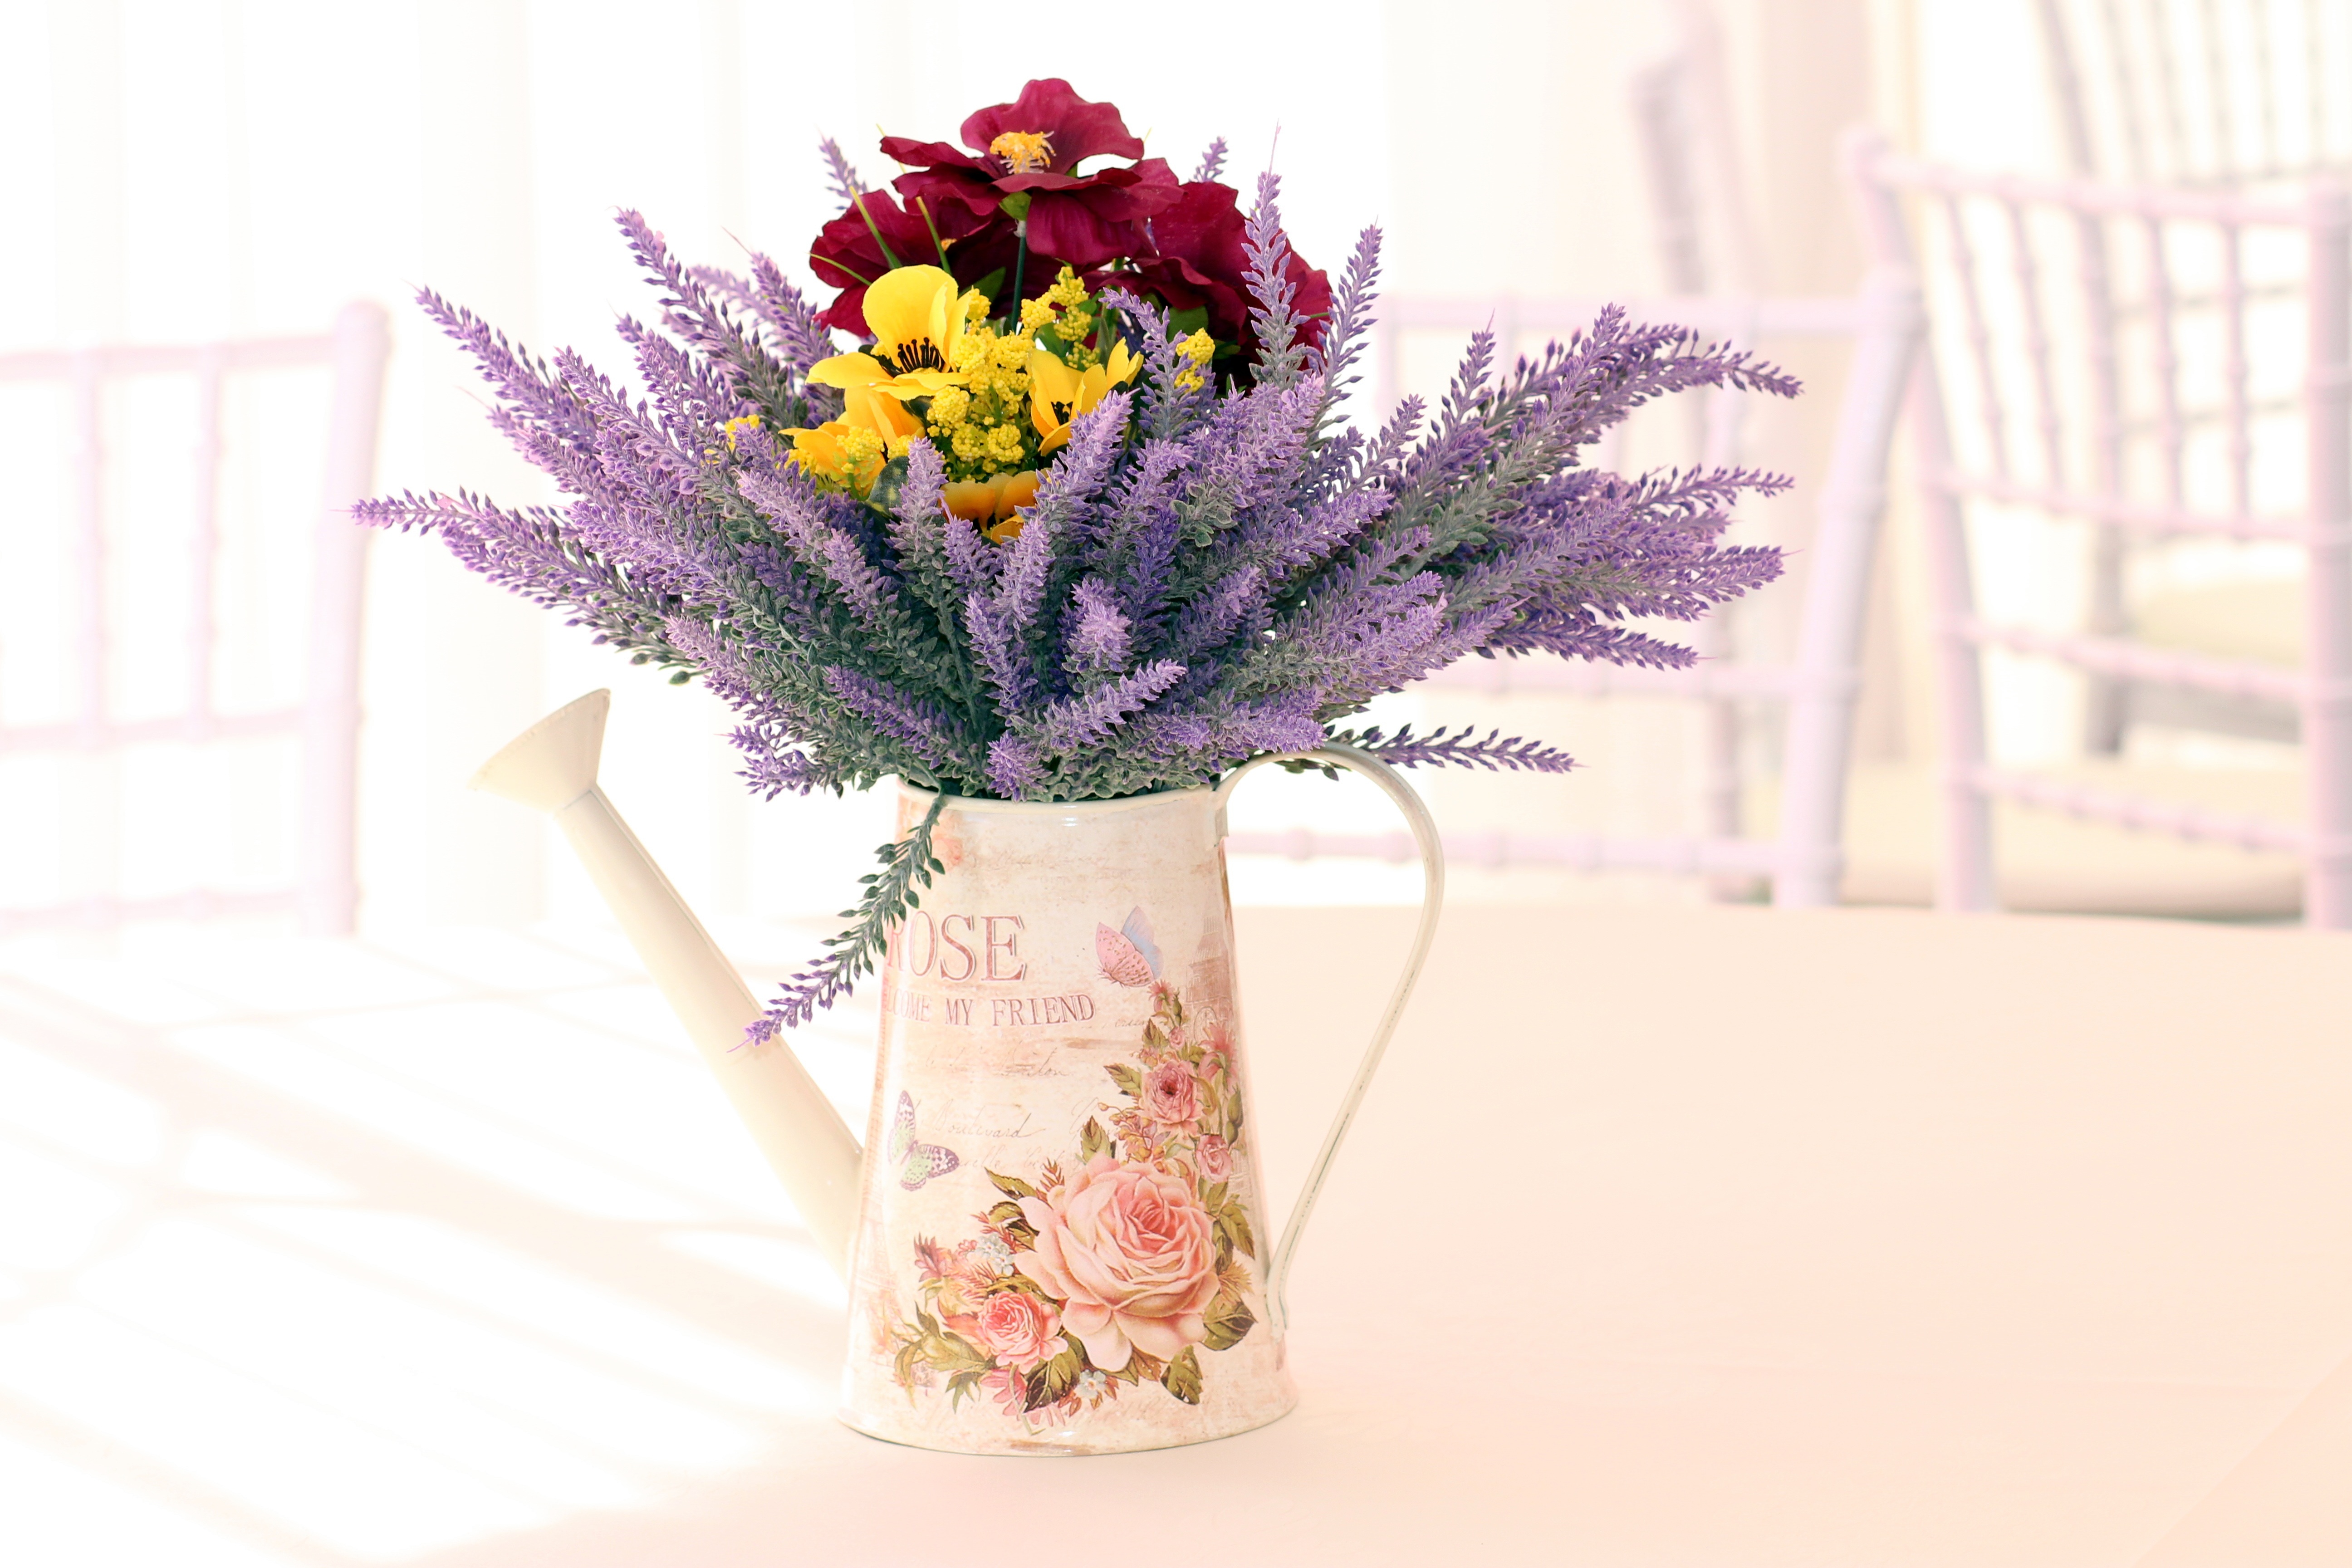 Flowers in a Pitcher by Adina Voicu